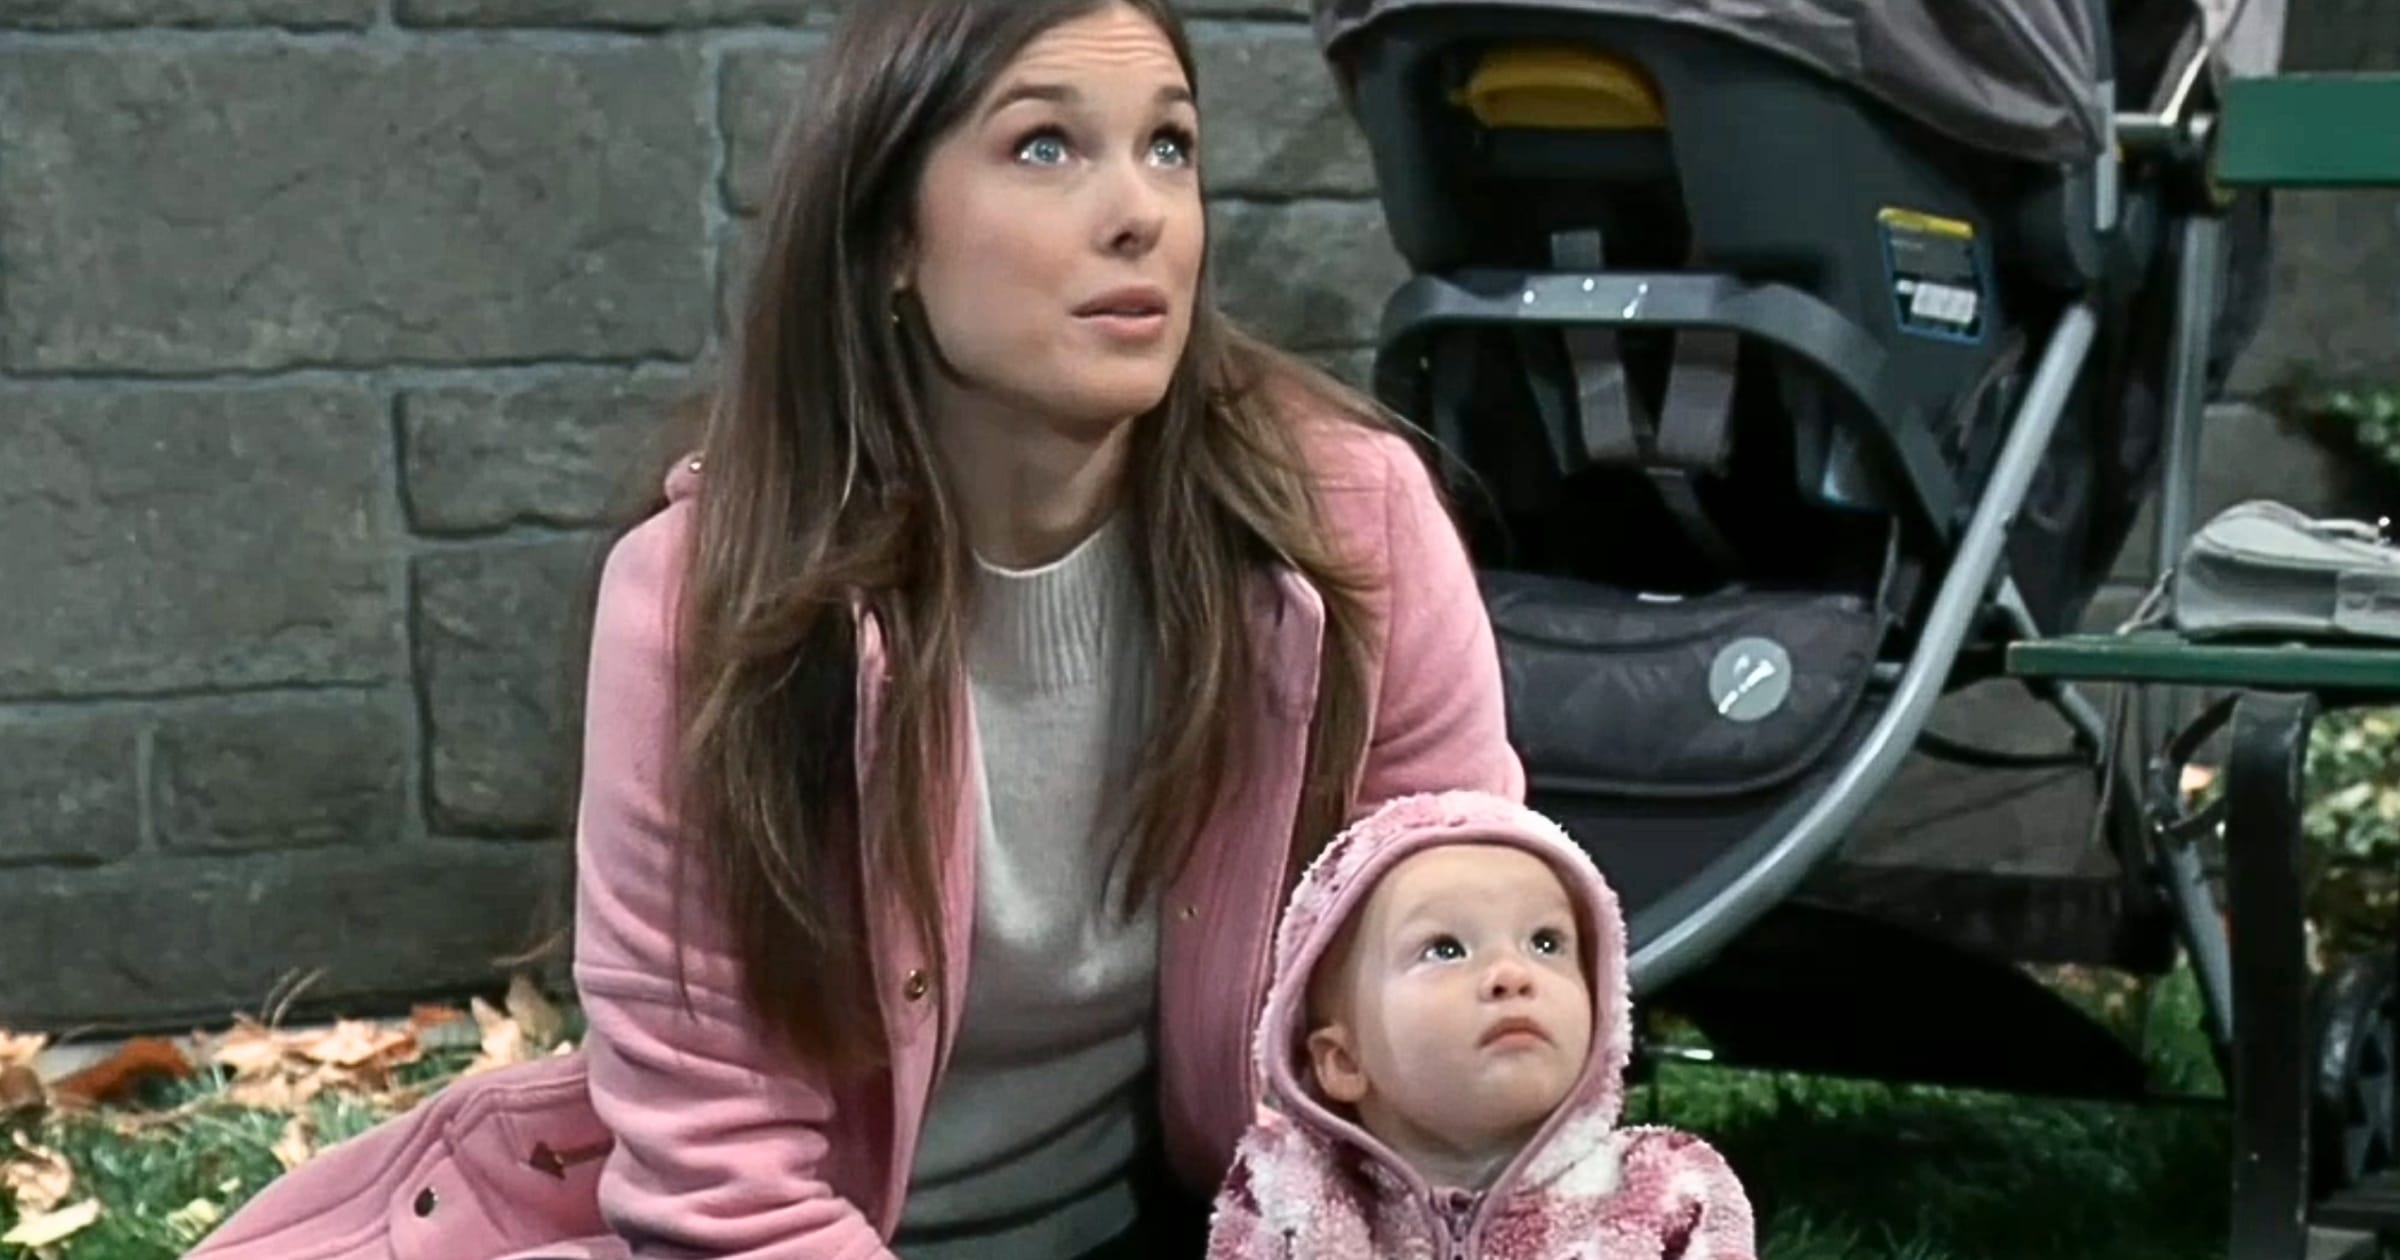 General Hospital - Nov 30 - Willow and Amelia